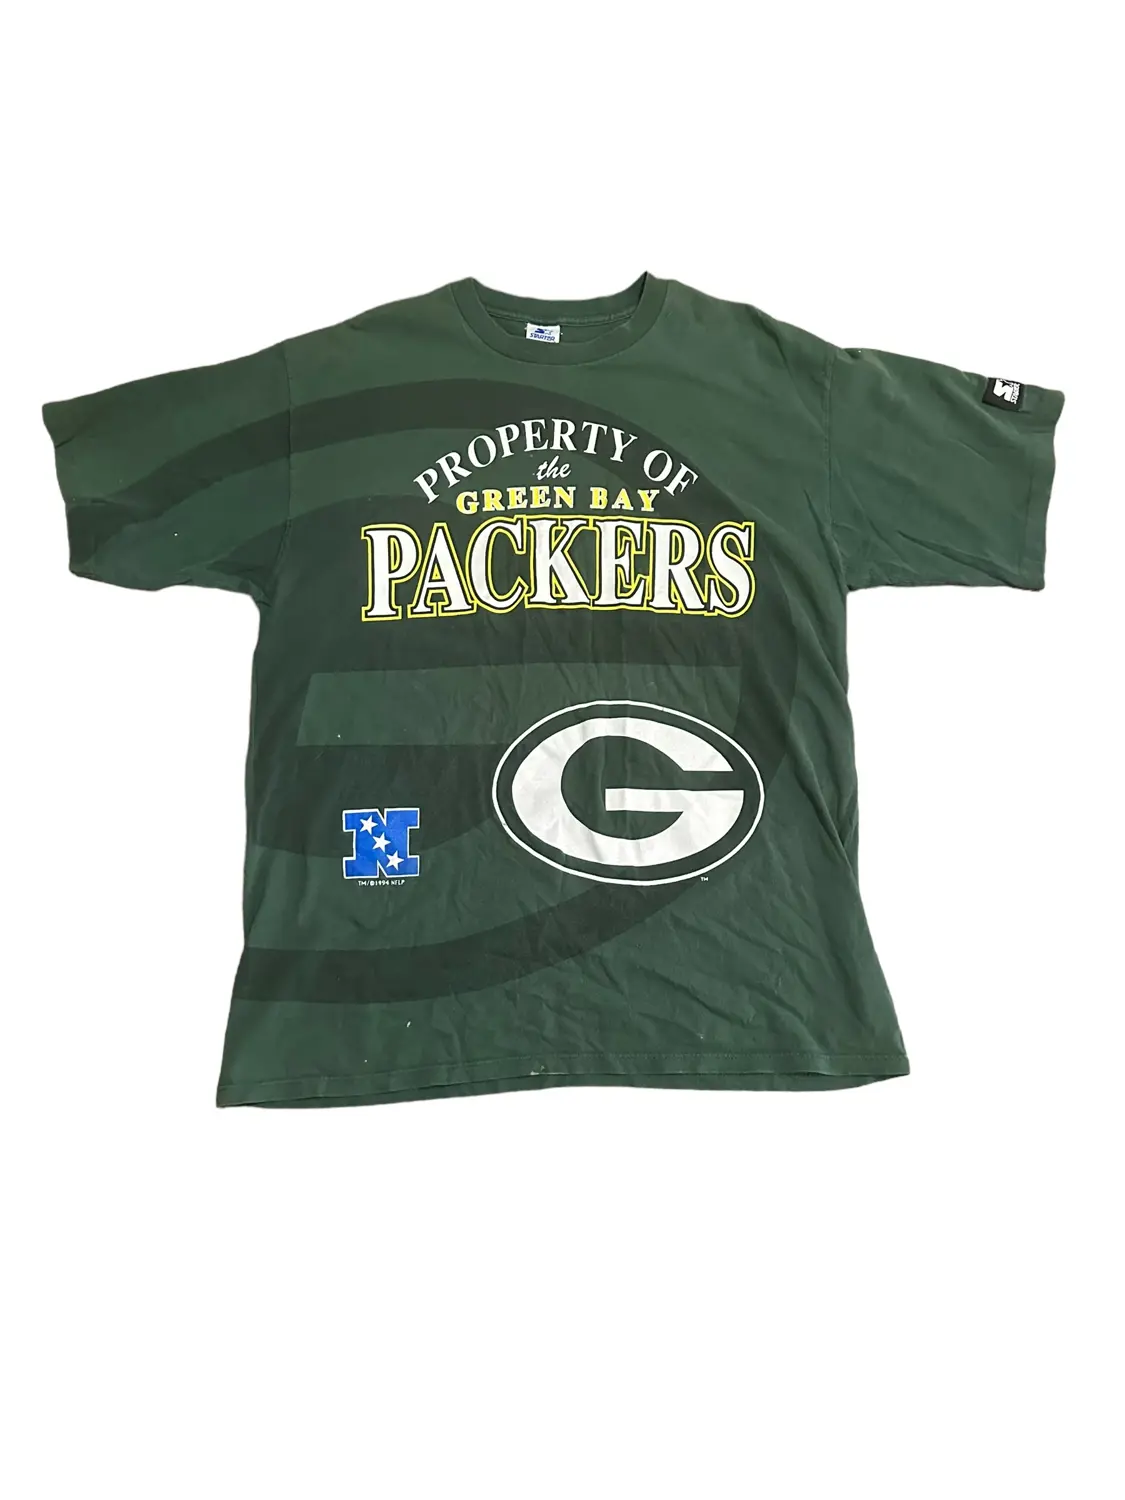 1994 Packers